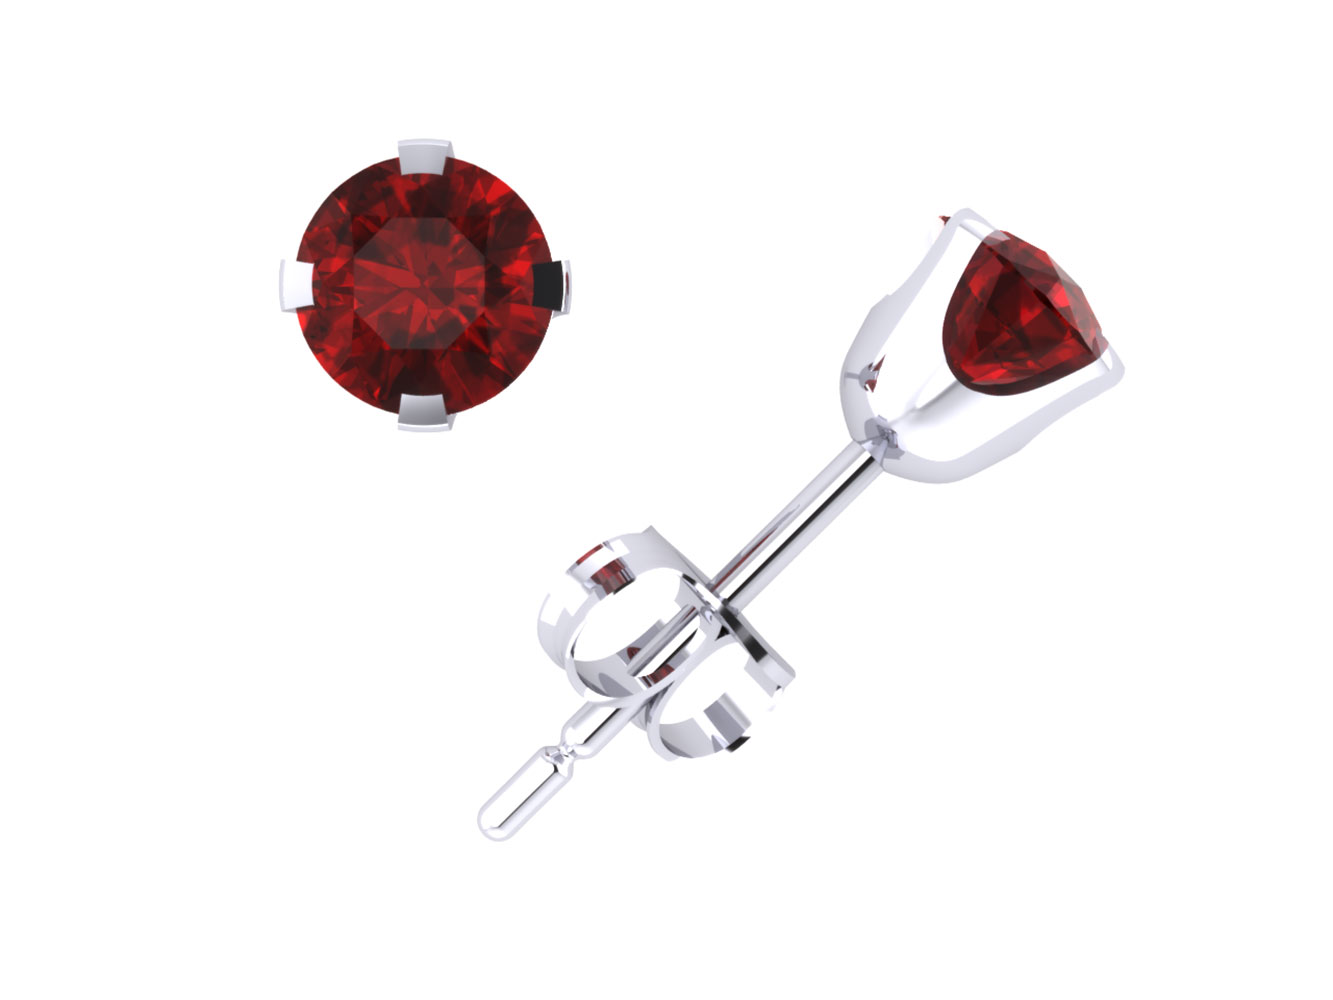 Jewel We Sell Natural 0.75Ct Round Cut Ruby Solitaire Stud Earrings 18k White or Yellow Gold Prong AAAA